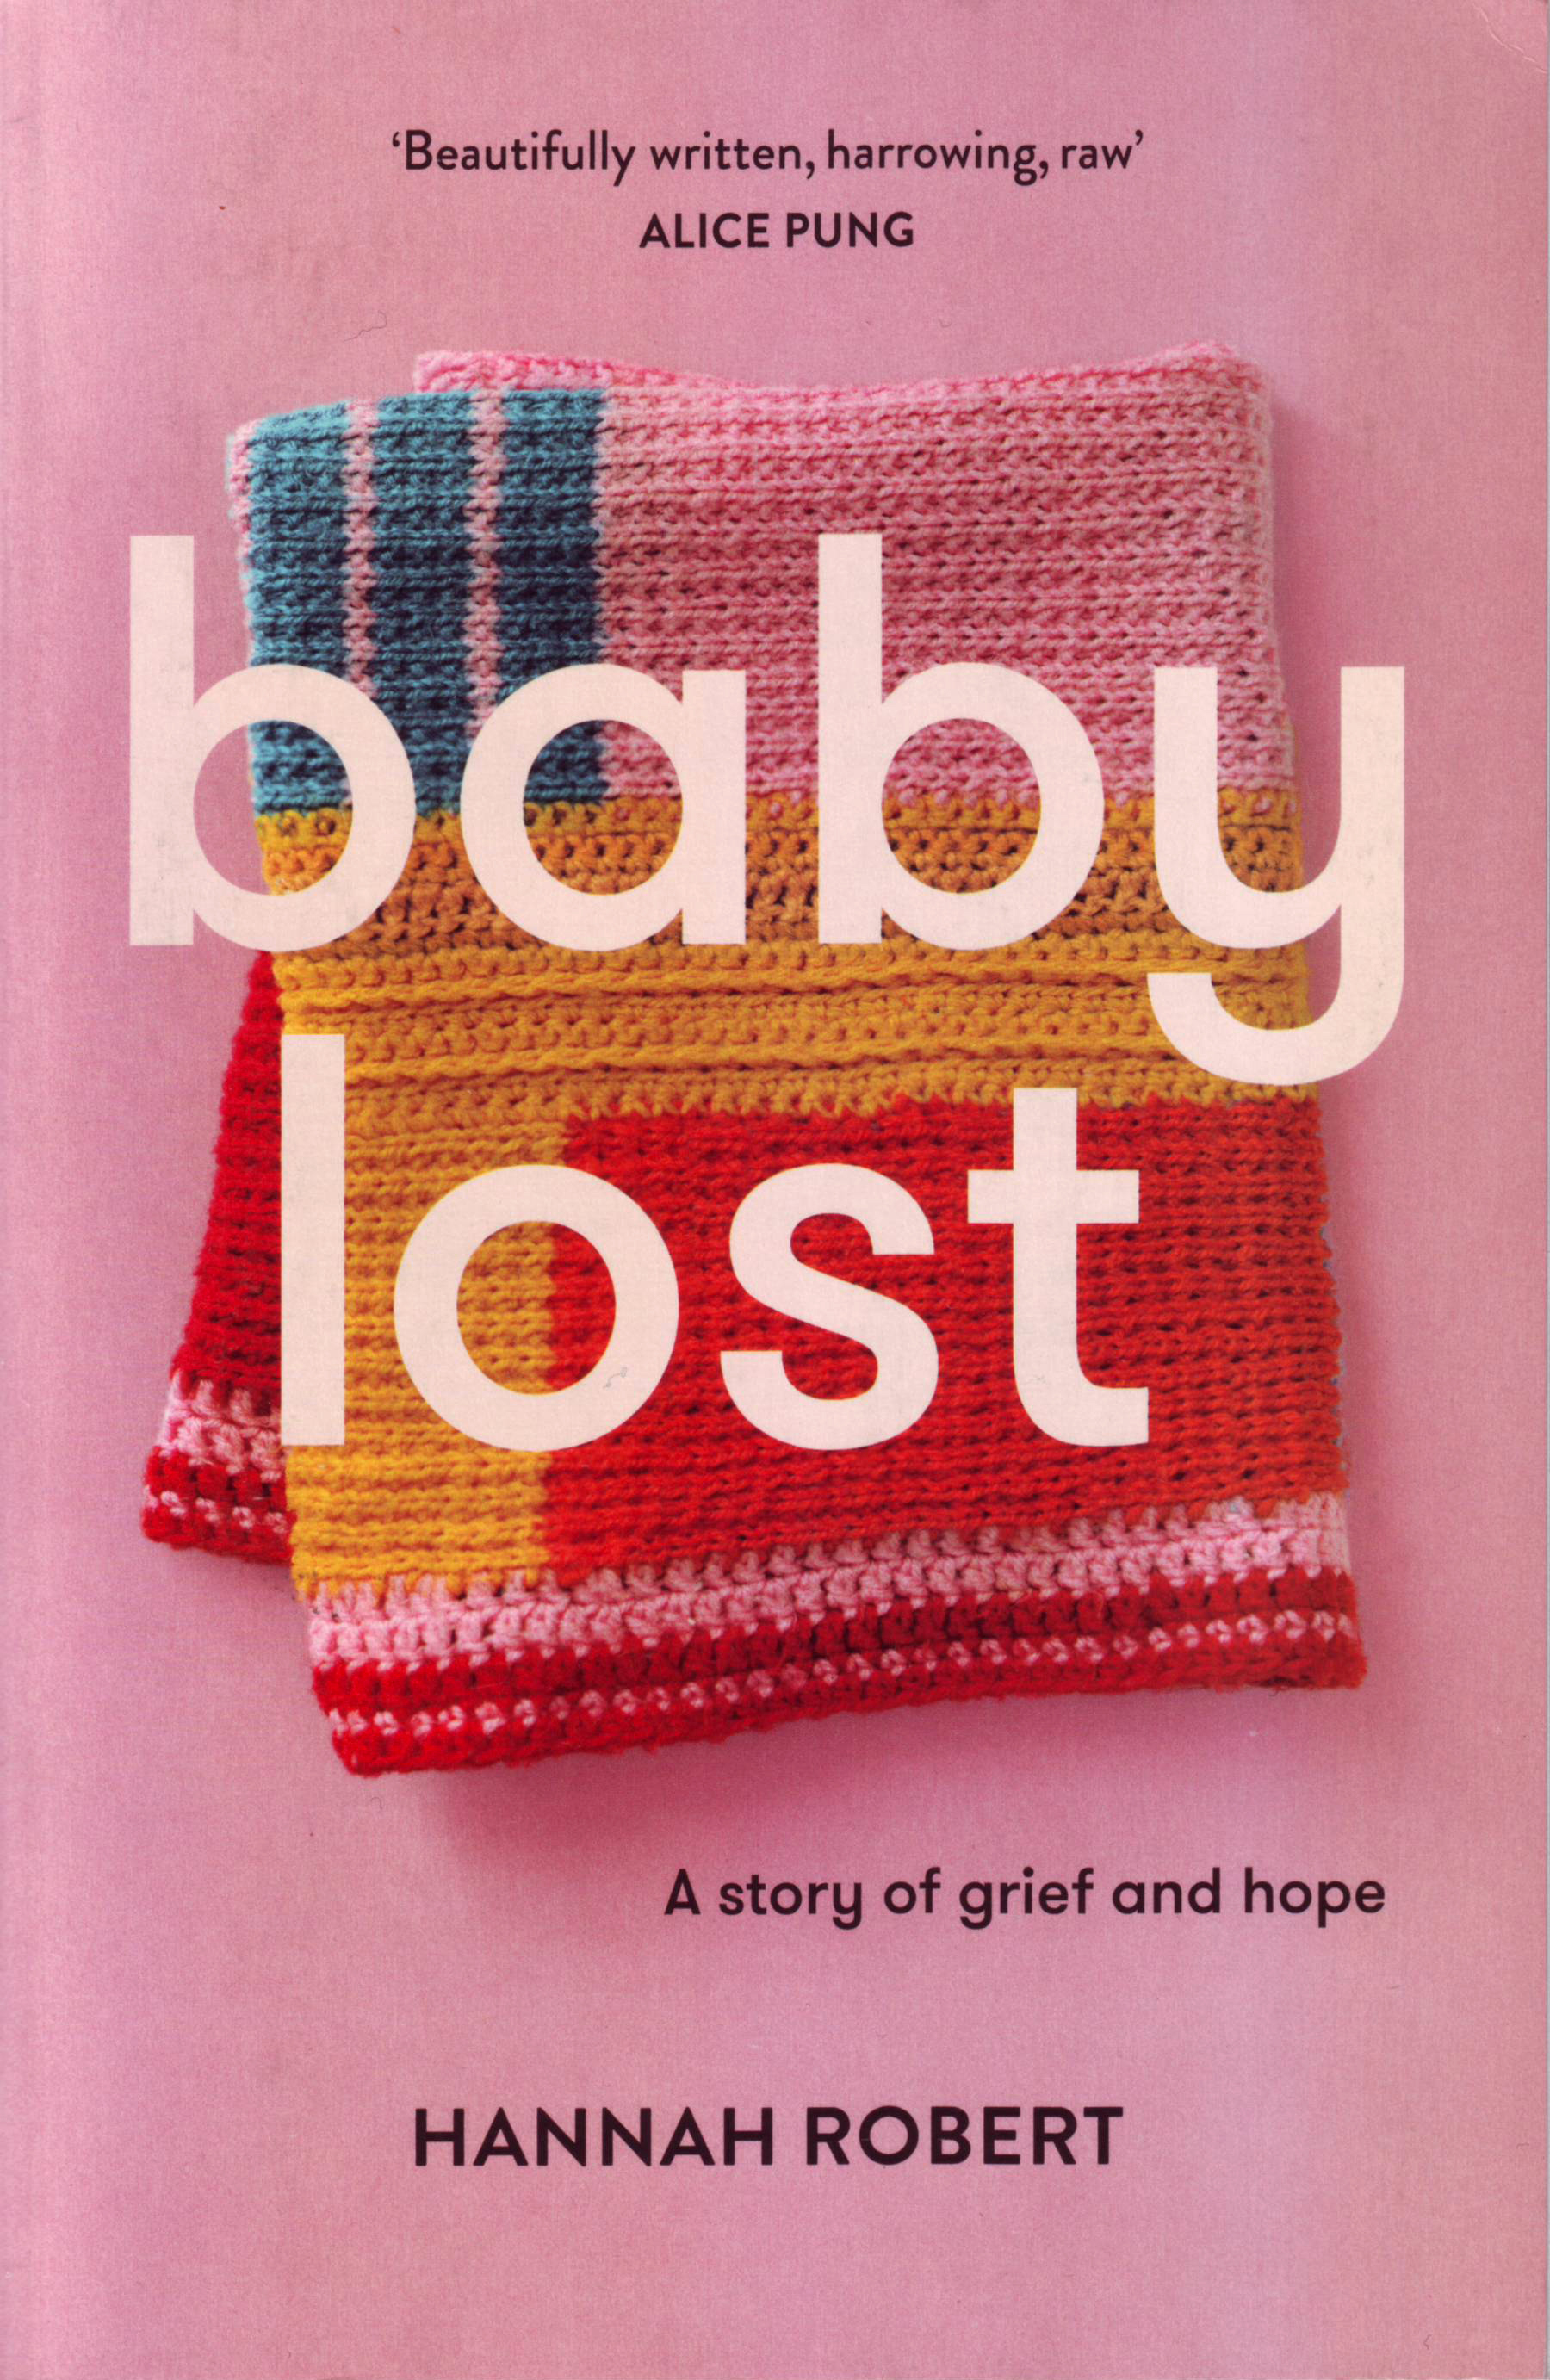 Baby Lost A Story of Grief and Hope